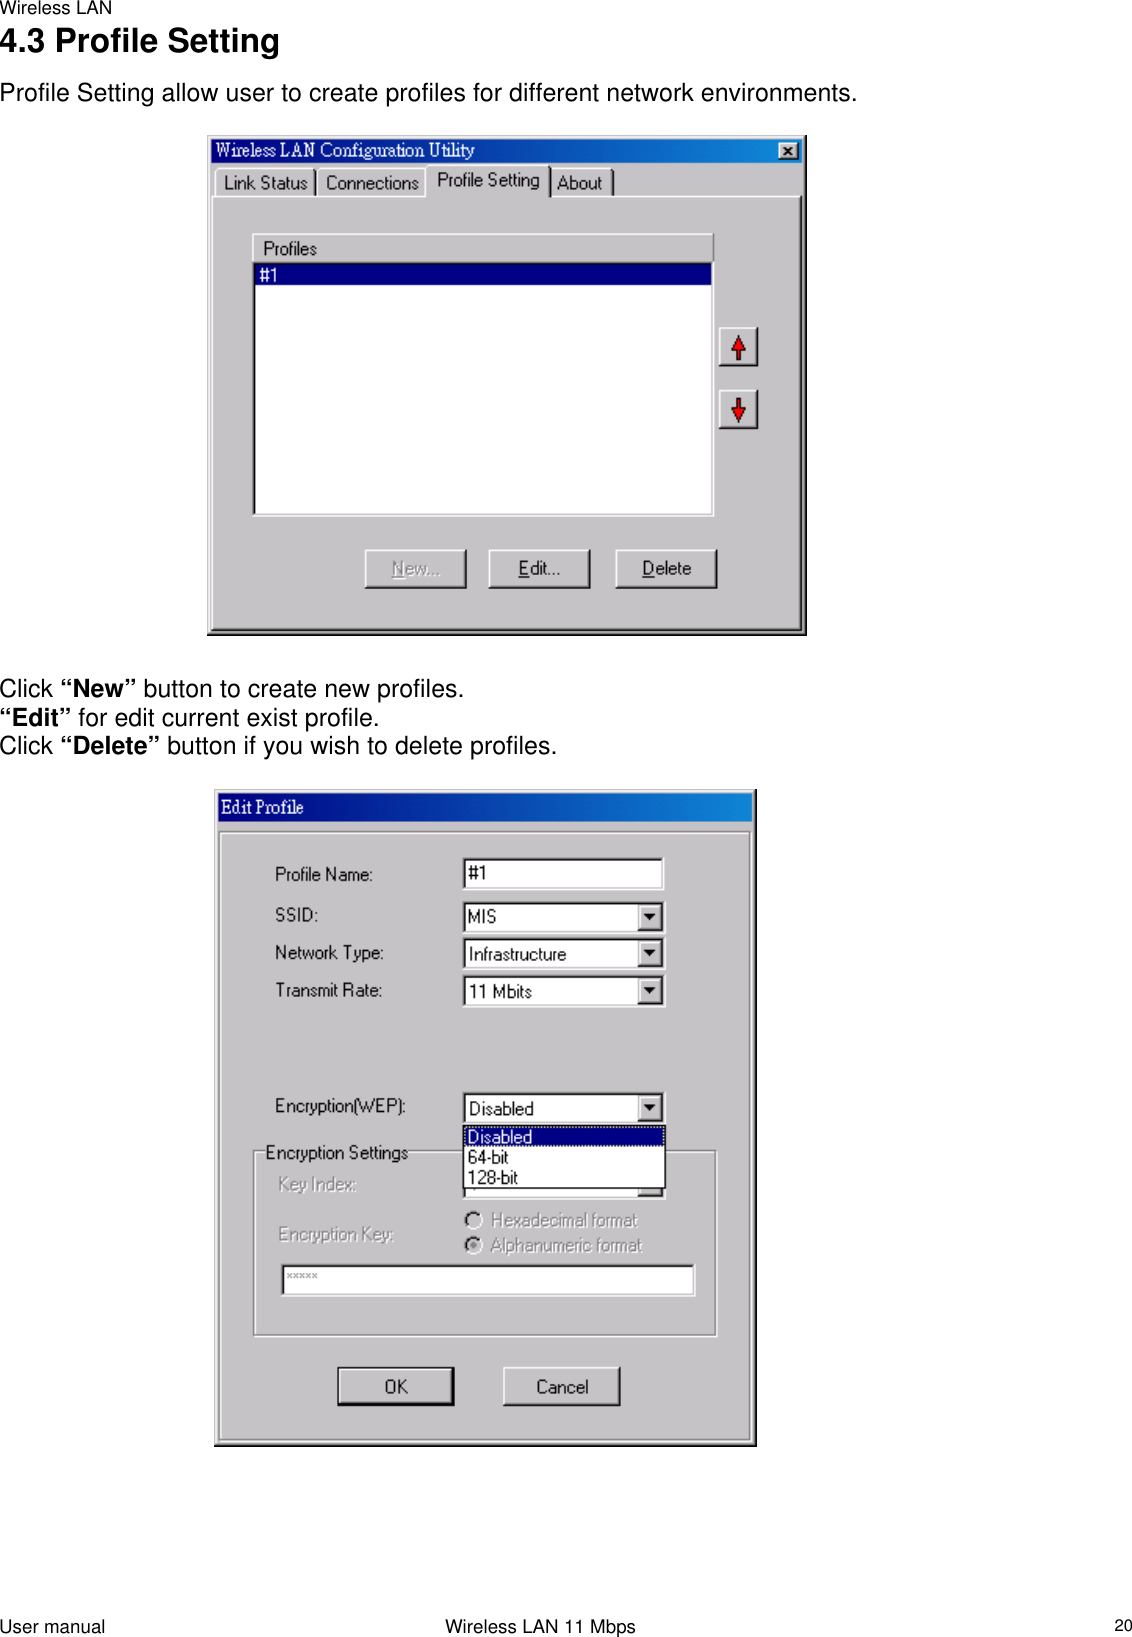 Wireless LAN  4.3 Profile Setting  Profile Setting allow user to create profiles for different network environments.                                     Click “New” button to create new profiles.  “Edit” for edit current exist profile. Click “Delete” button if you wish to delete profiles.                                               User manual                                                                 Wireless LAN 11 Mbps   20